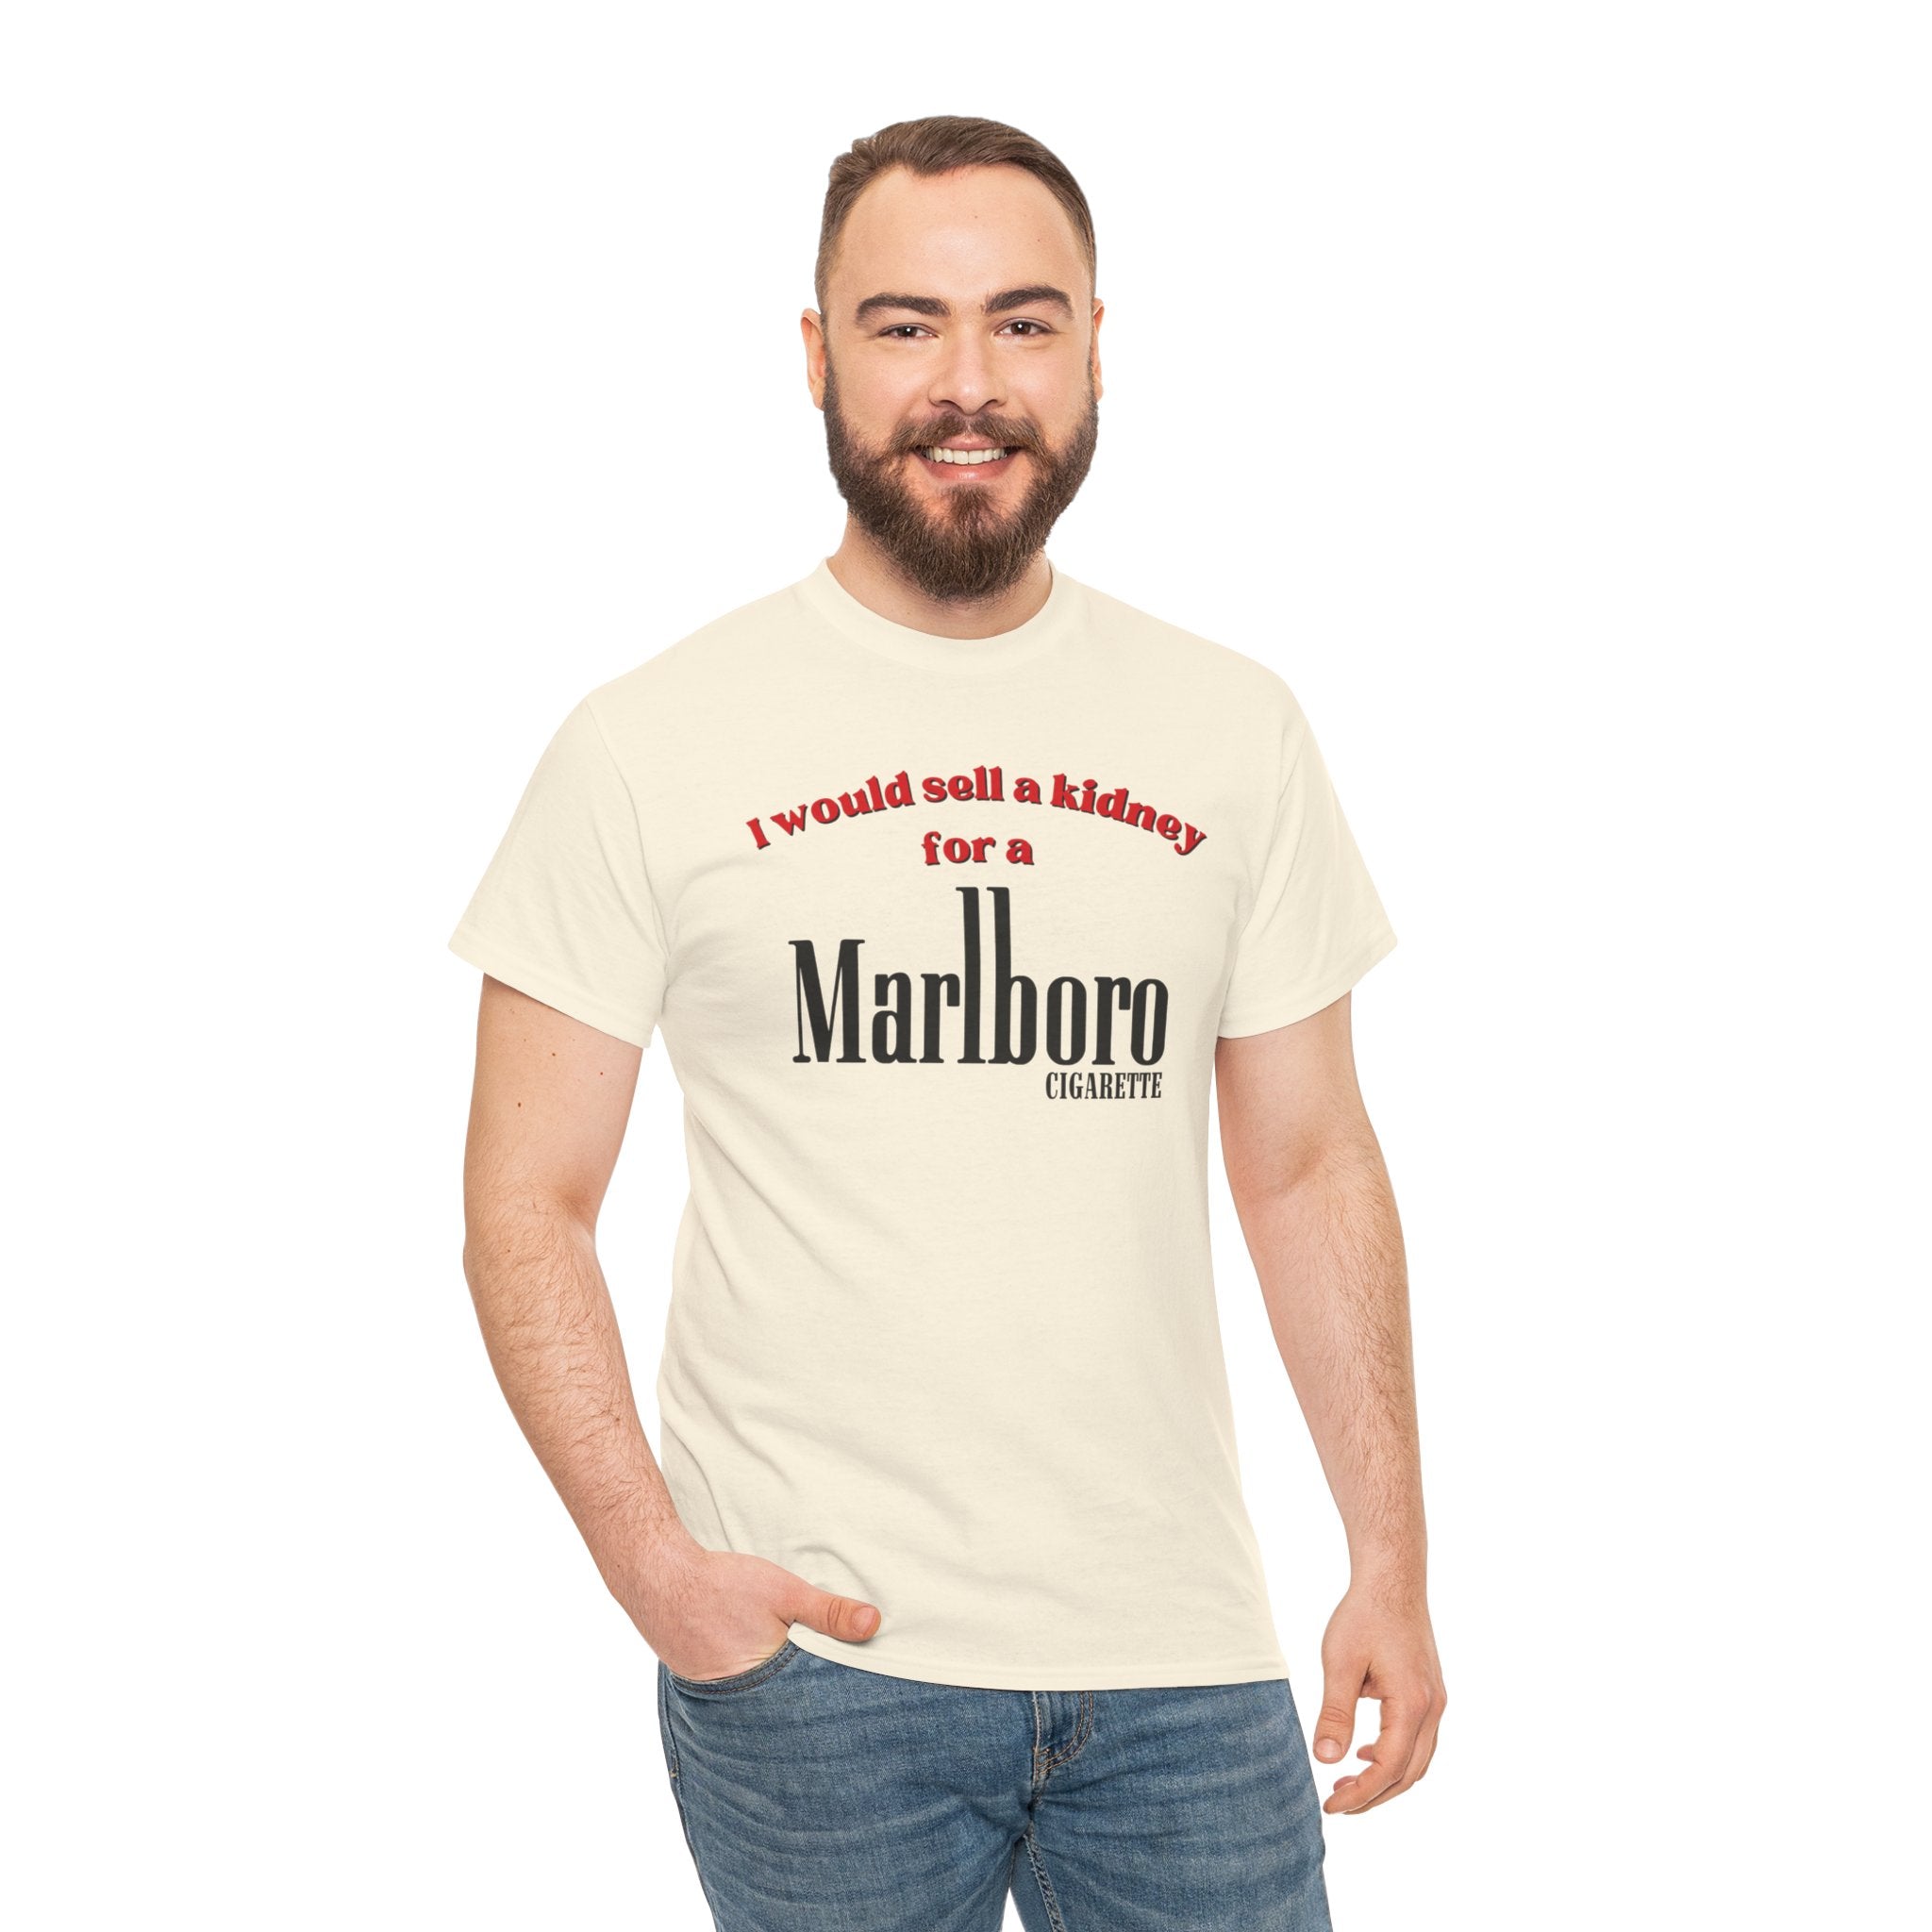 I Would Sell a Kidney for a Marlboro Cigarette